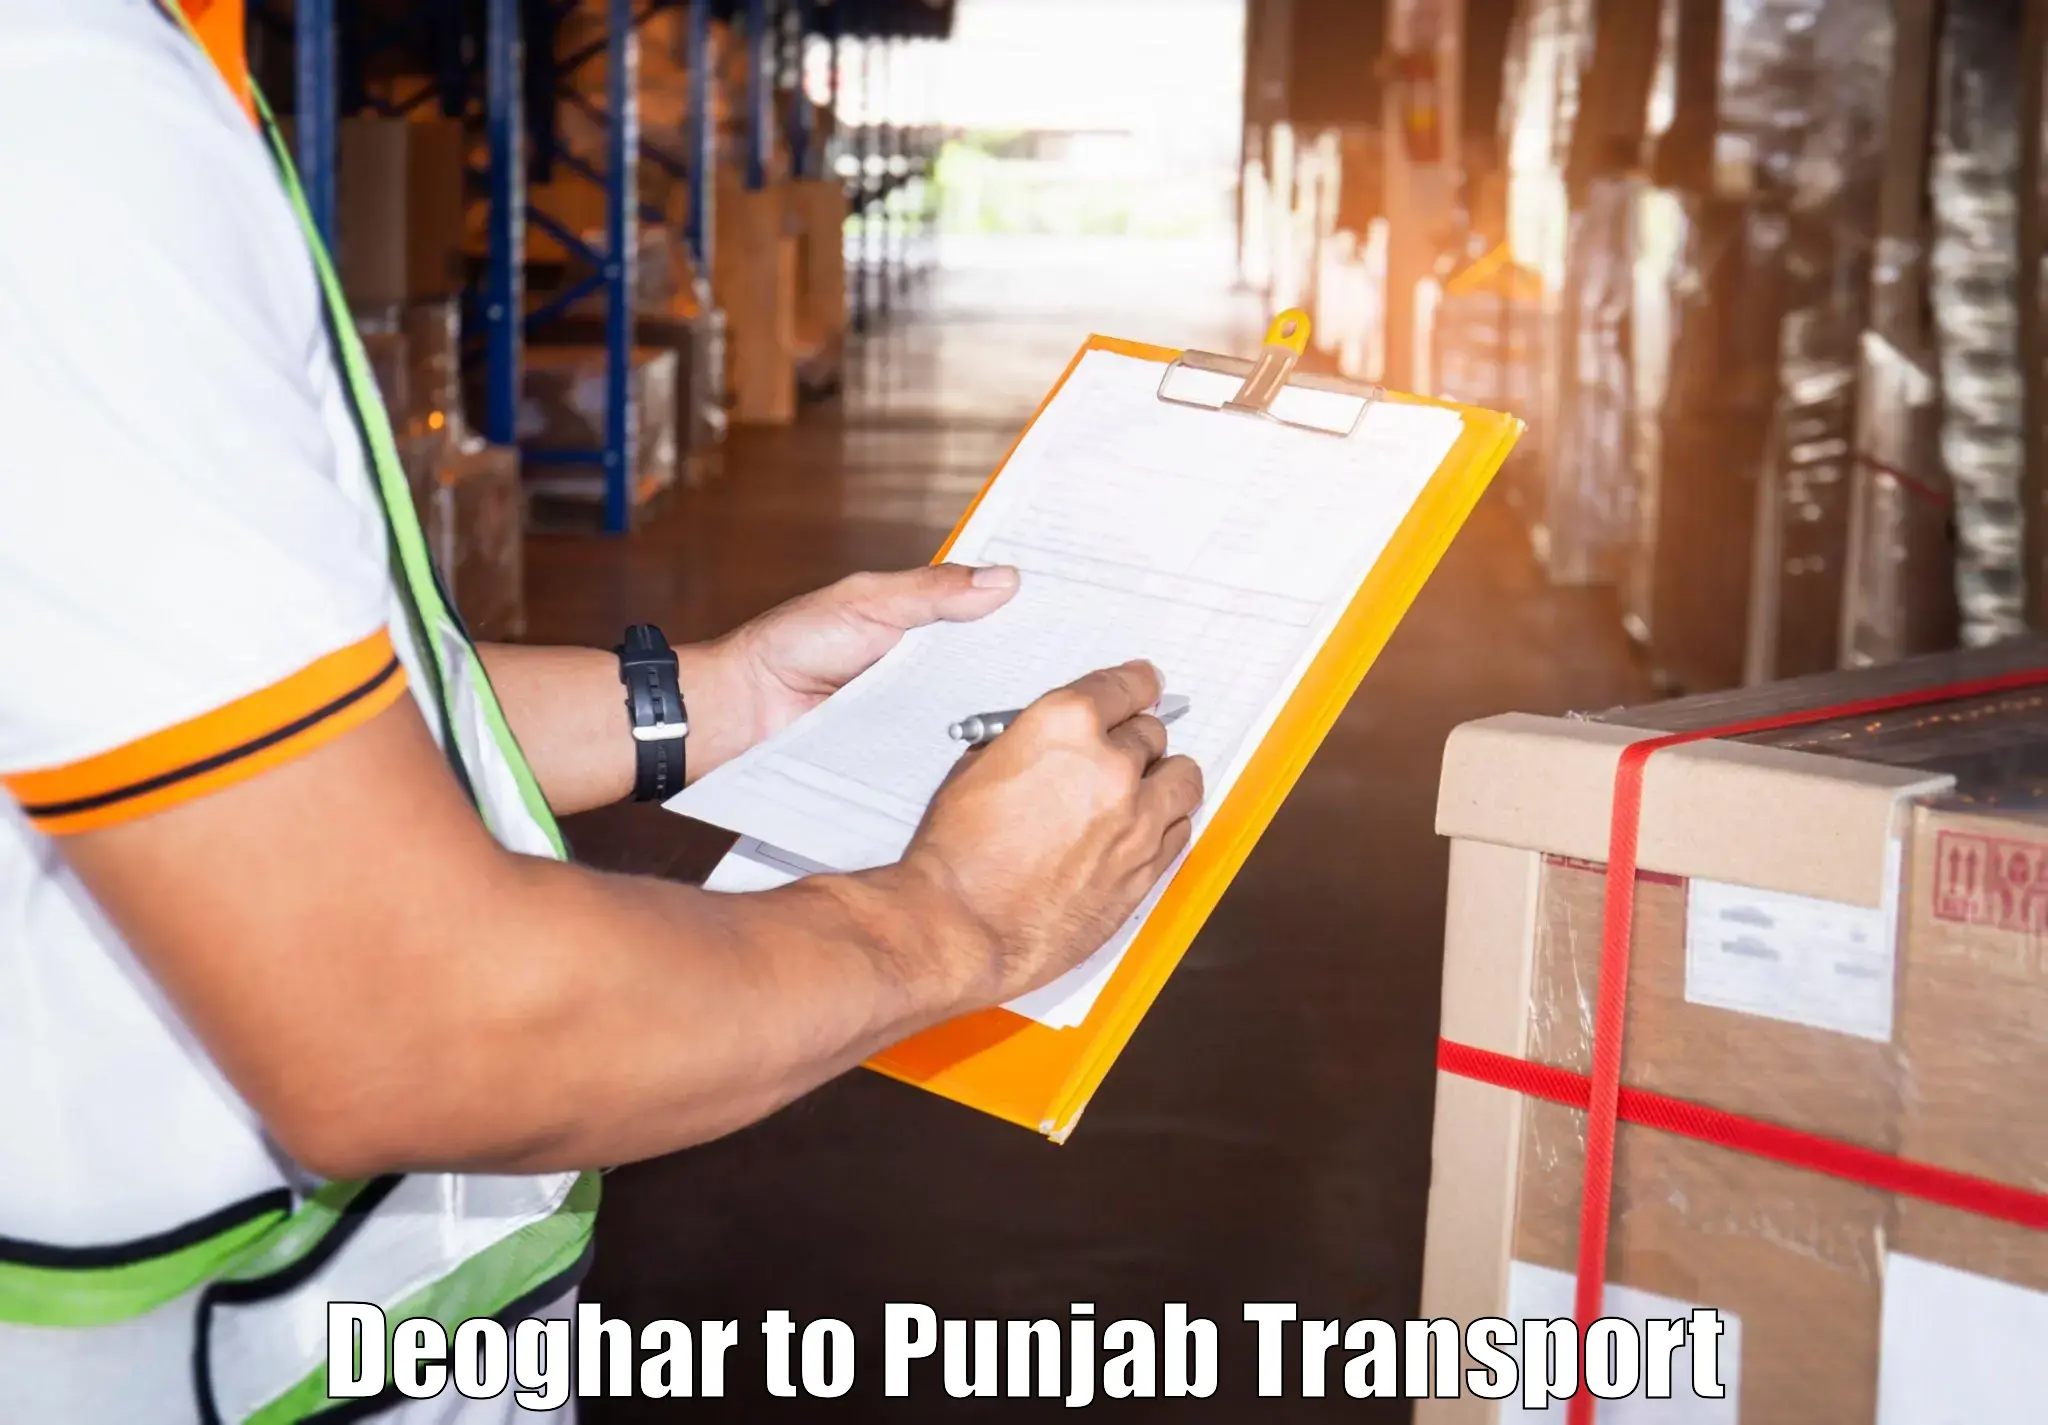 Transport bike from one state to another Deoghar to Phillaur